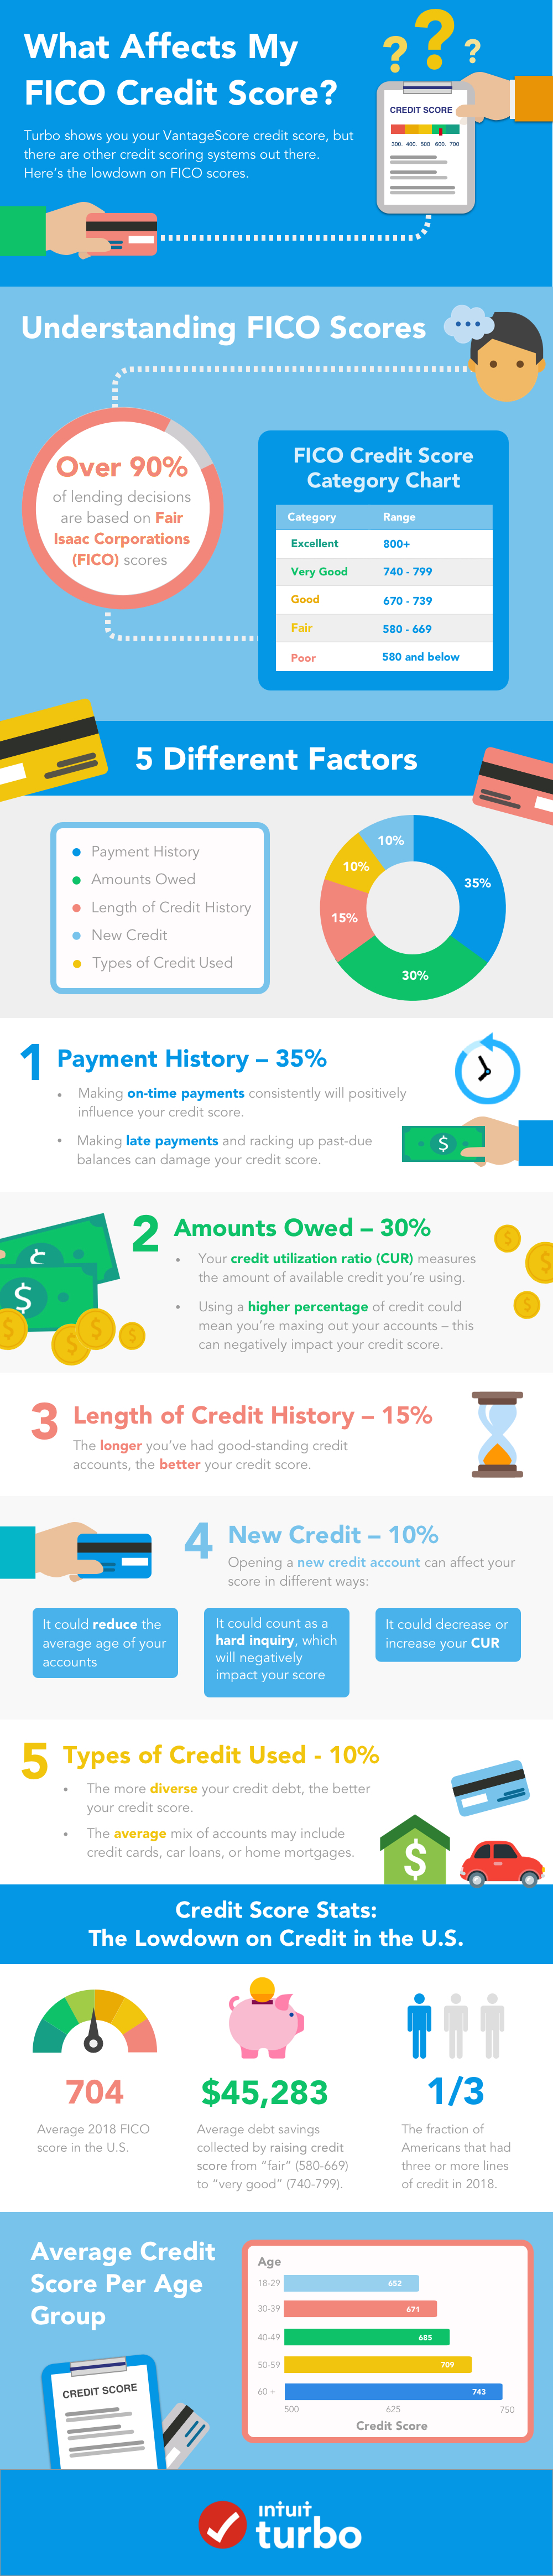 what affects my FICO credit score?